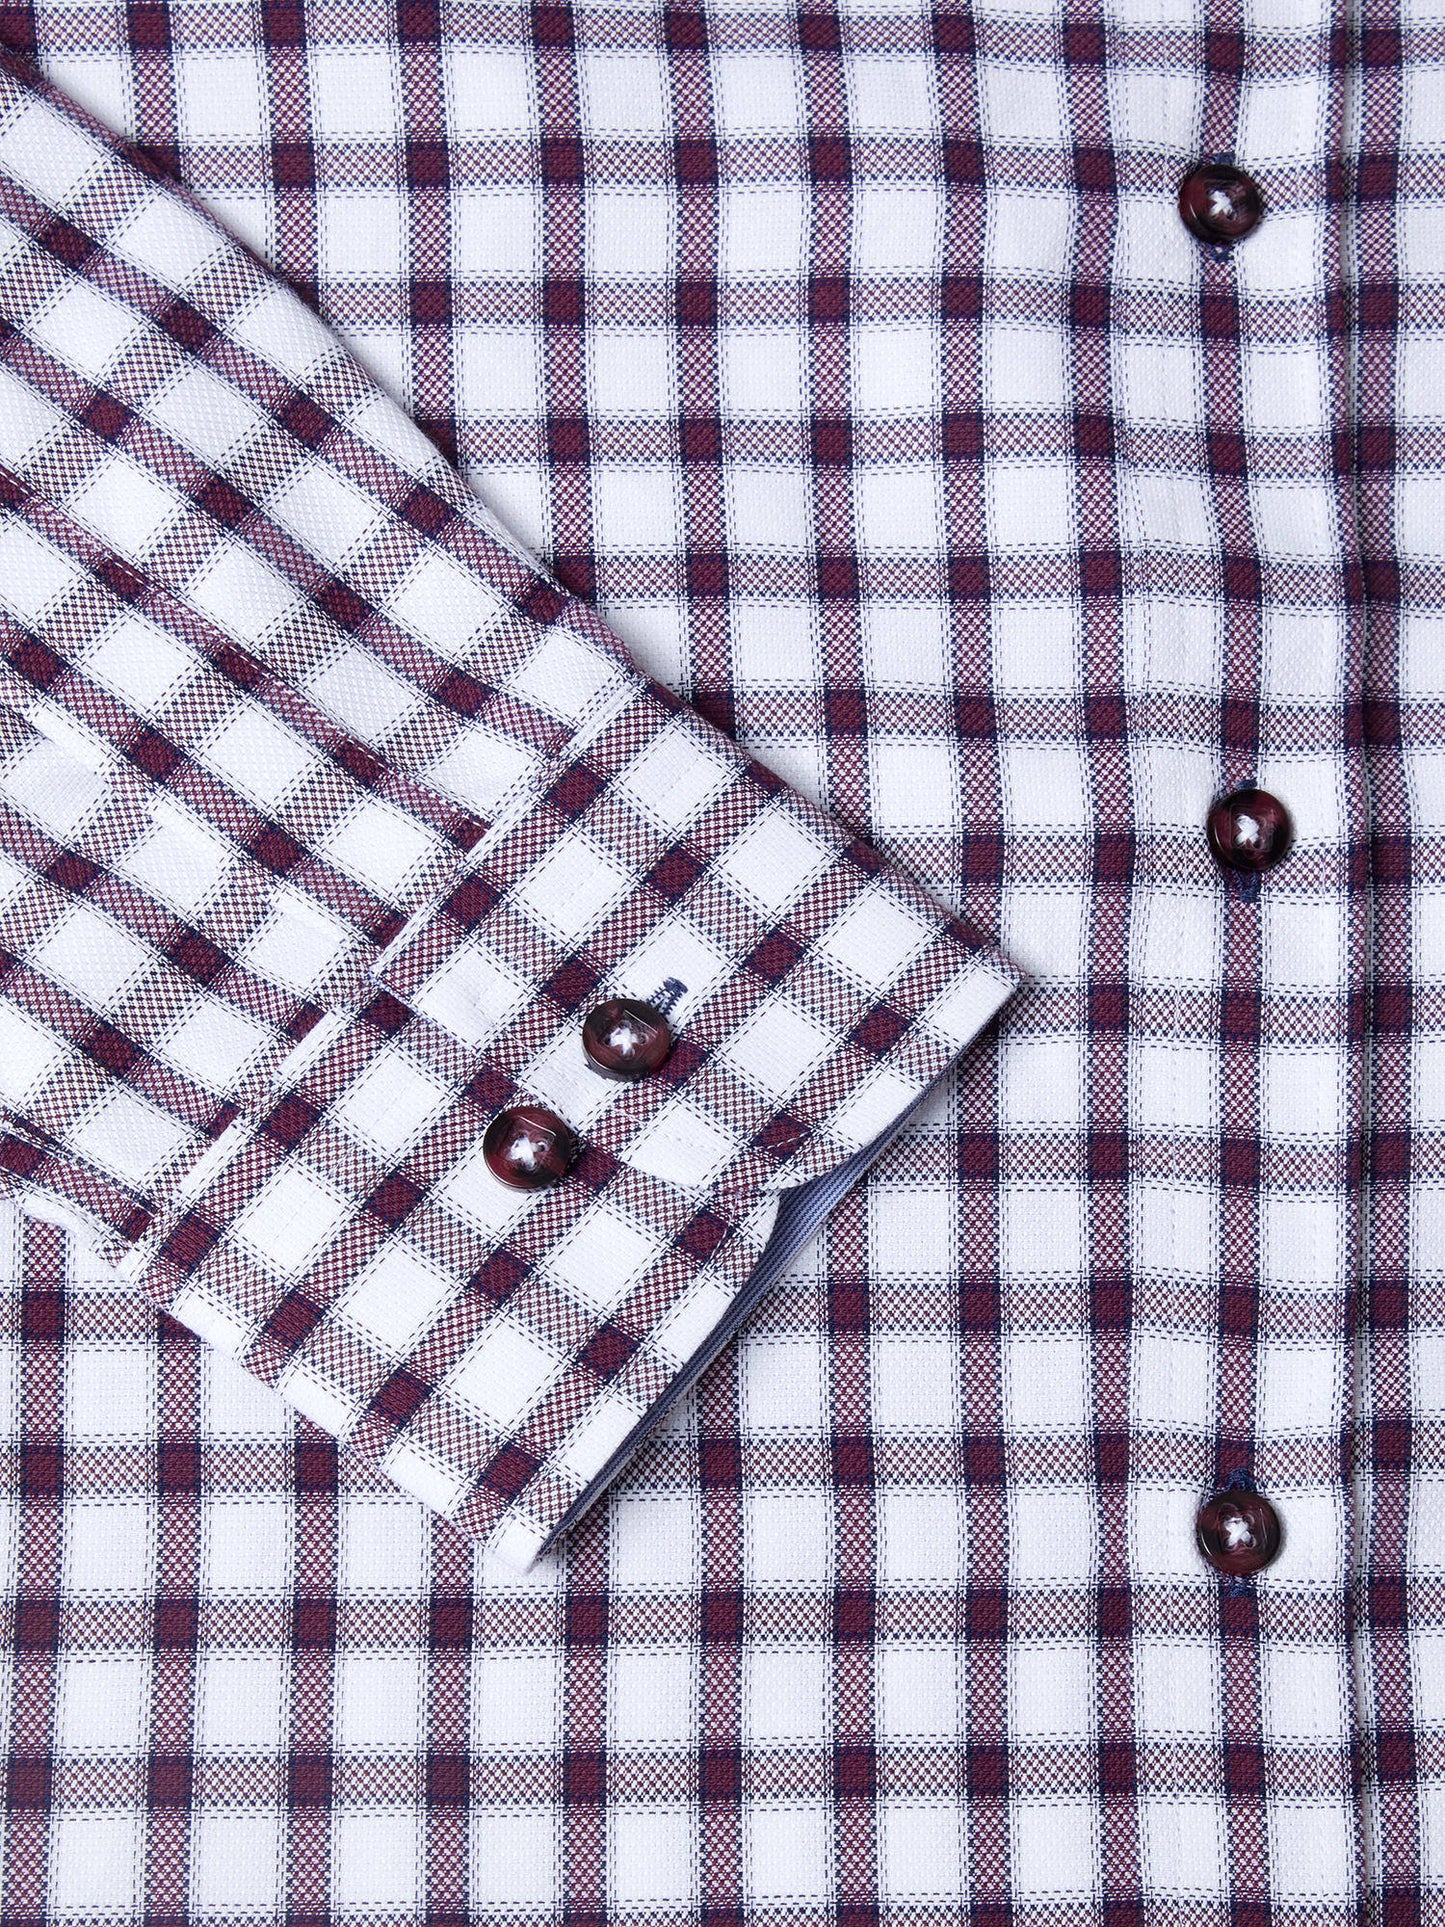 Cotton-Rich Button-Down Long-Sleeve Shirt - Red Check Warm Handle